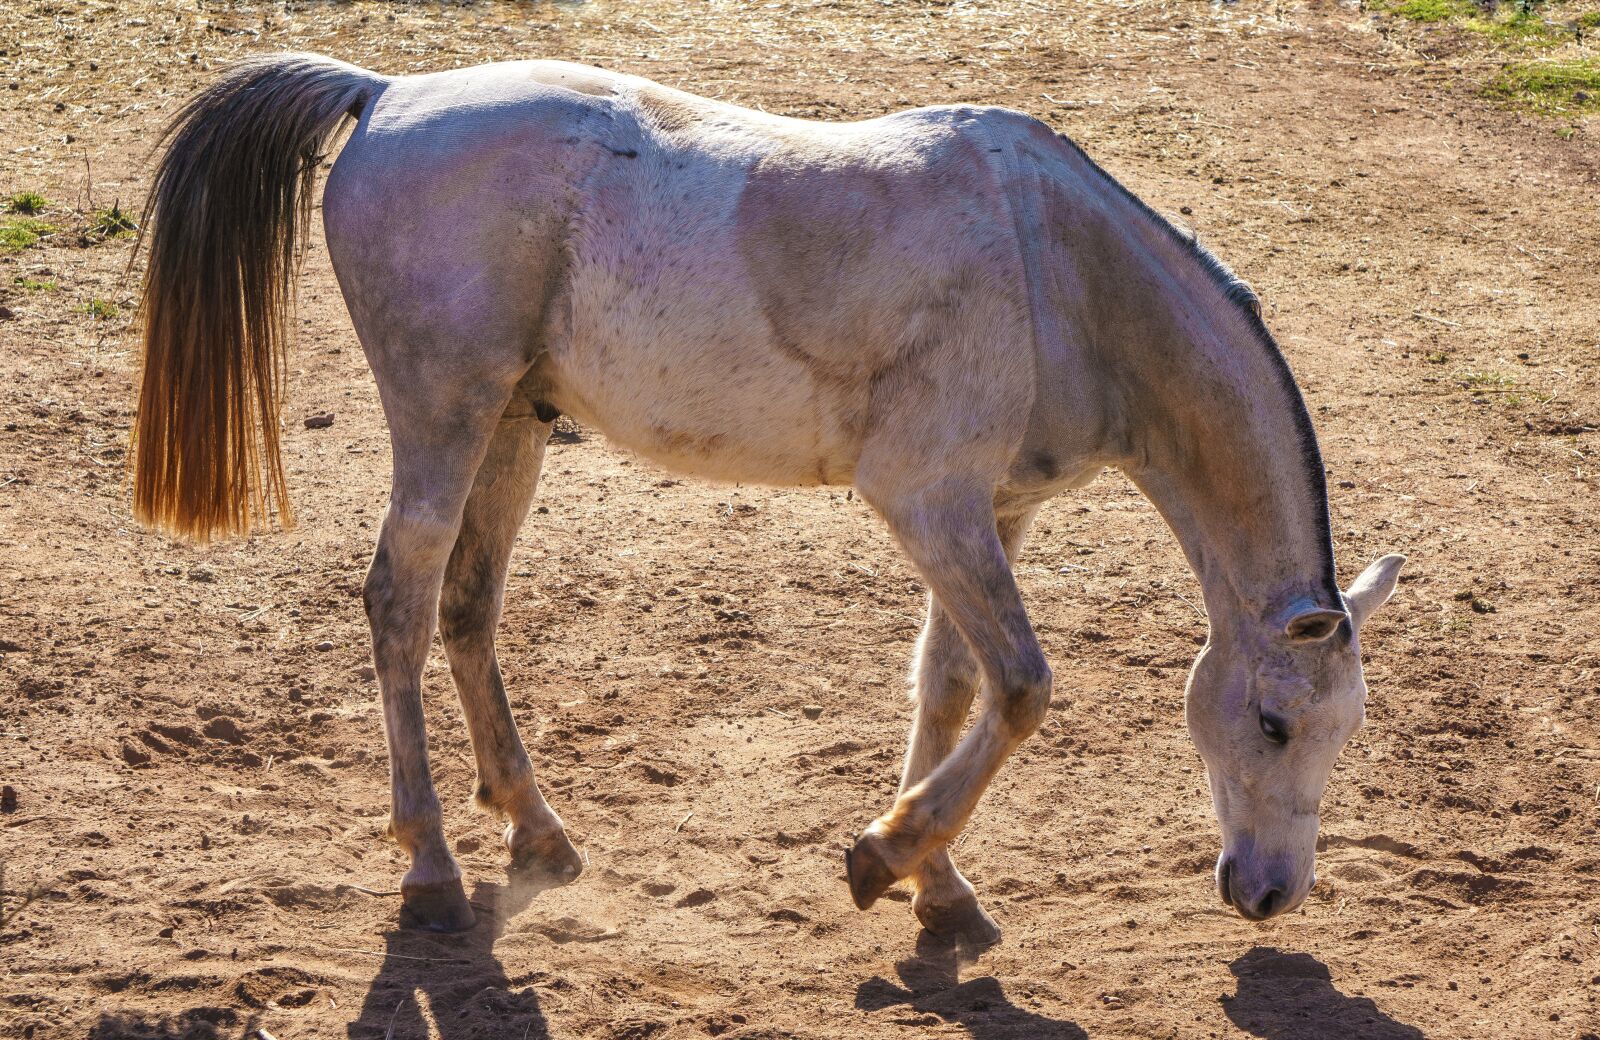 Sony a6000 sample photo. Horse, animal, equine photography